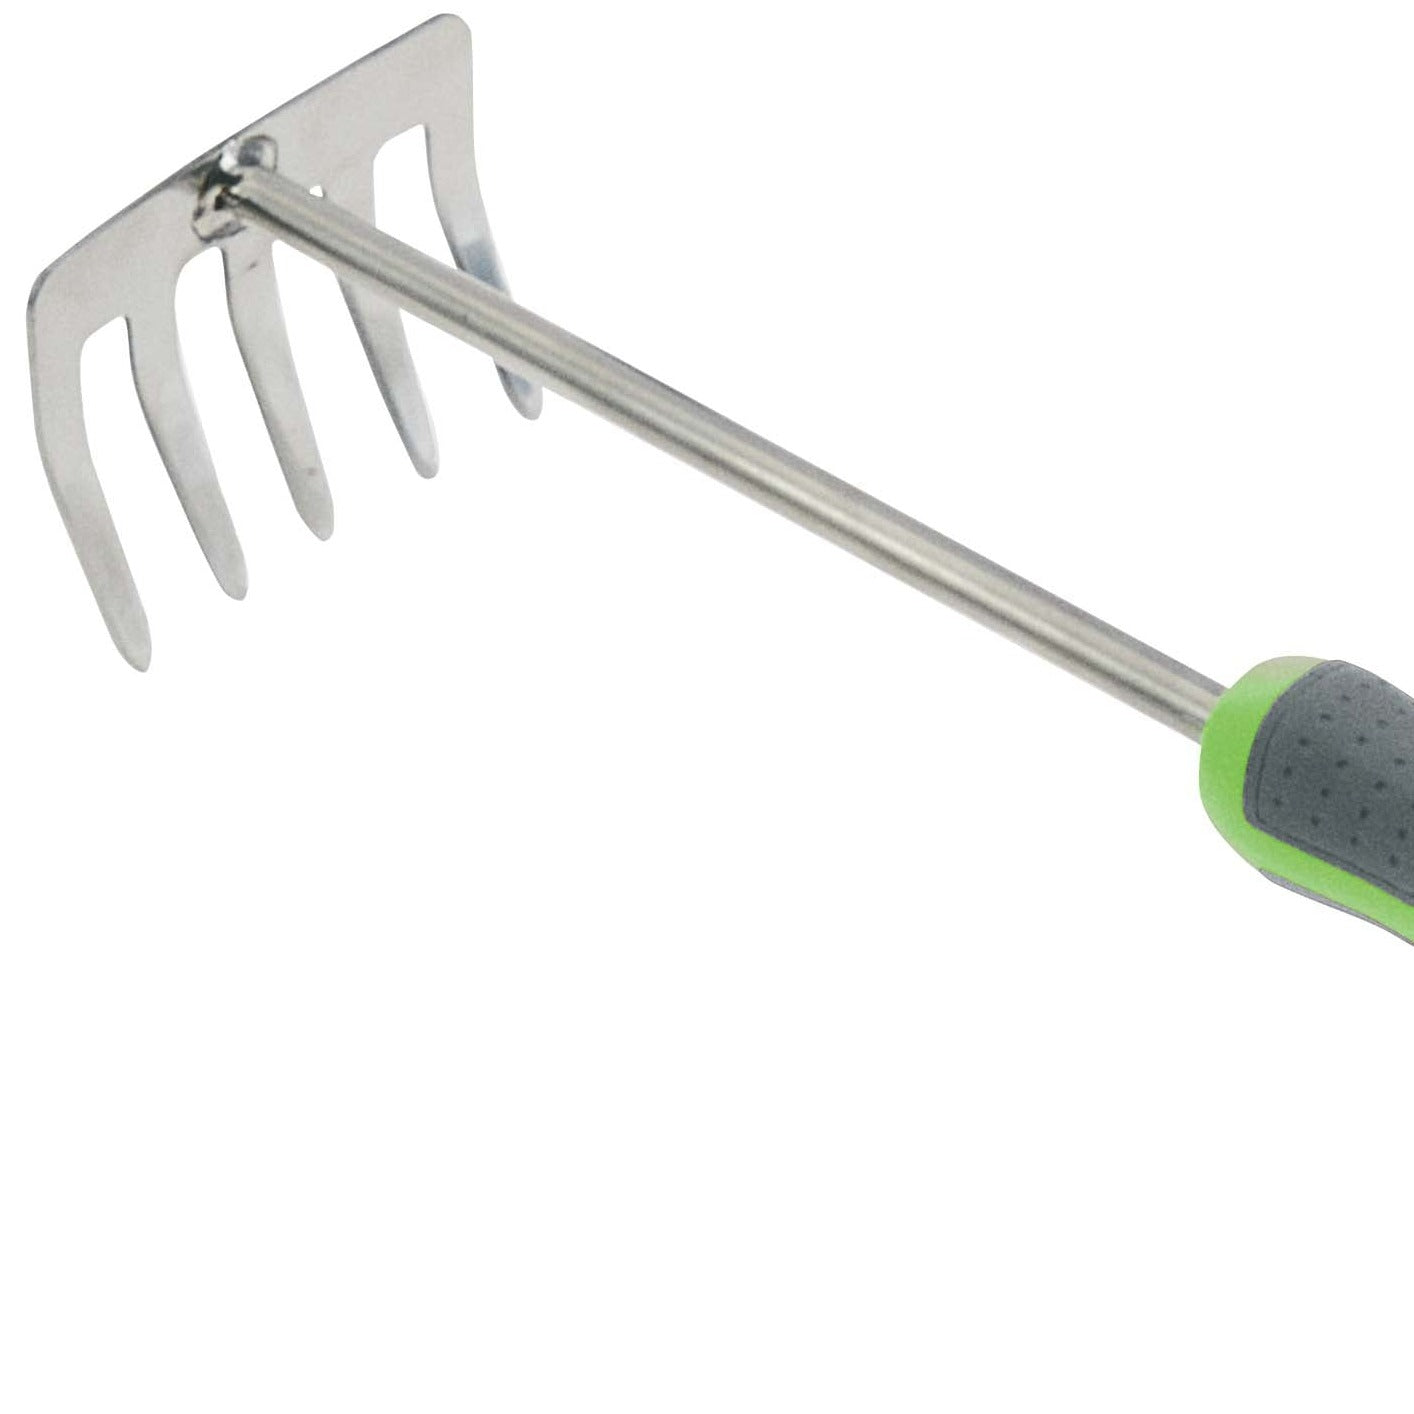 Verdemax Stainless Steel Hand Rake featuring a durable stainless steel head with five tines and a sturdy, ergonomic grey and green handle. The rake is designed for comfortable use and long-lasting performance, ideal for various gardening tasks